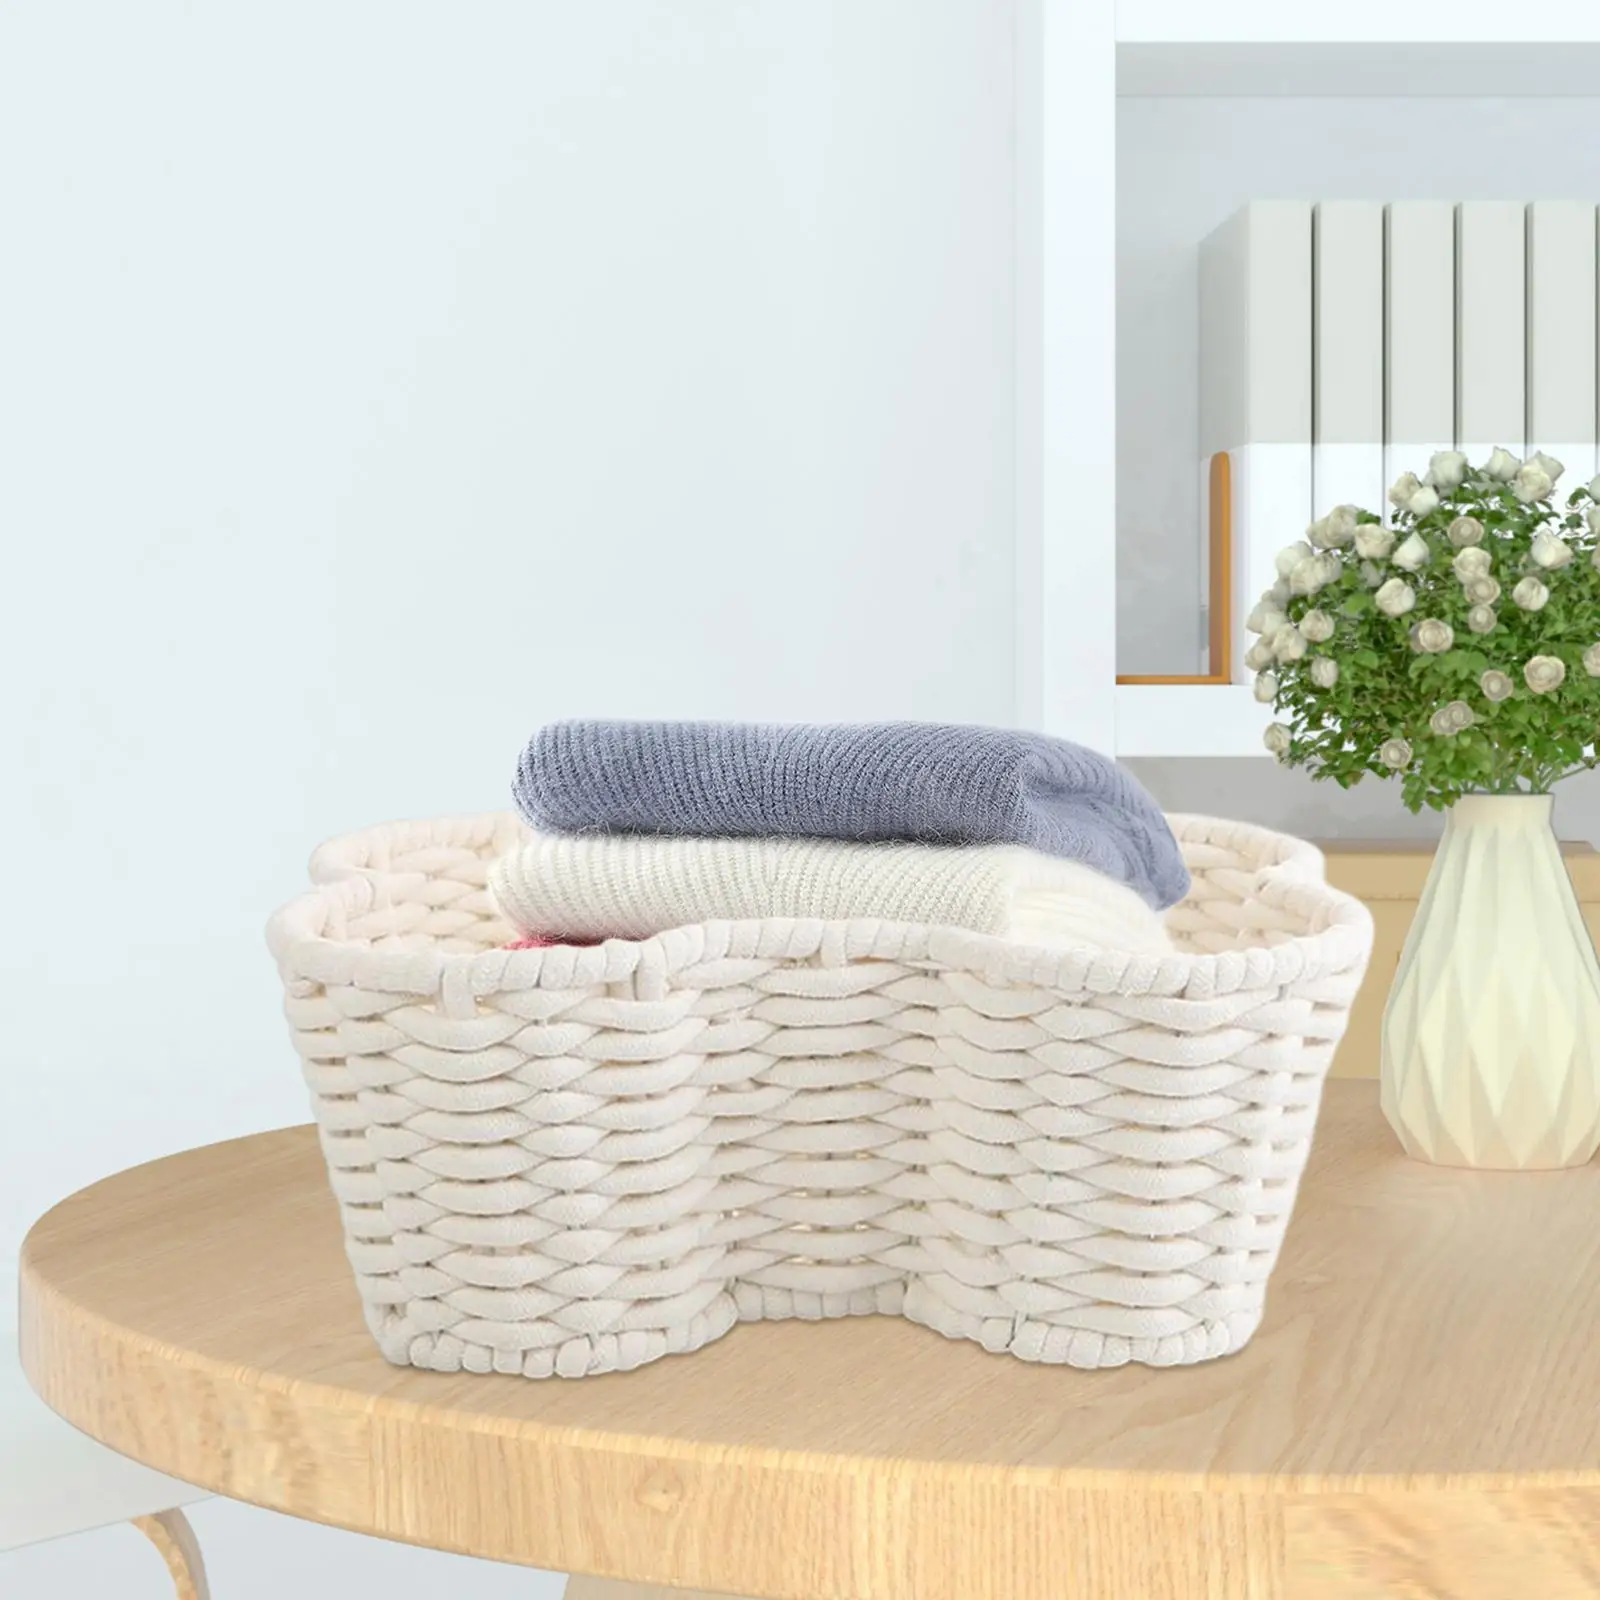 Handwoven Storage Basket Handcrafted Sundries Storage Box Soft Practical Household for Tabletop Bedroom Cabinet Kitchen Towels